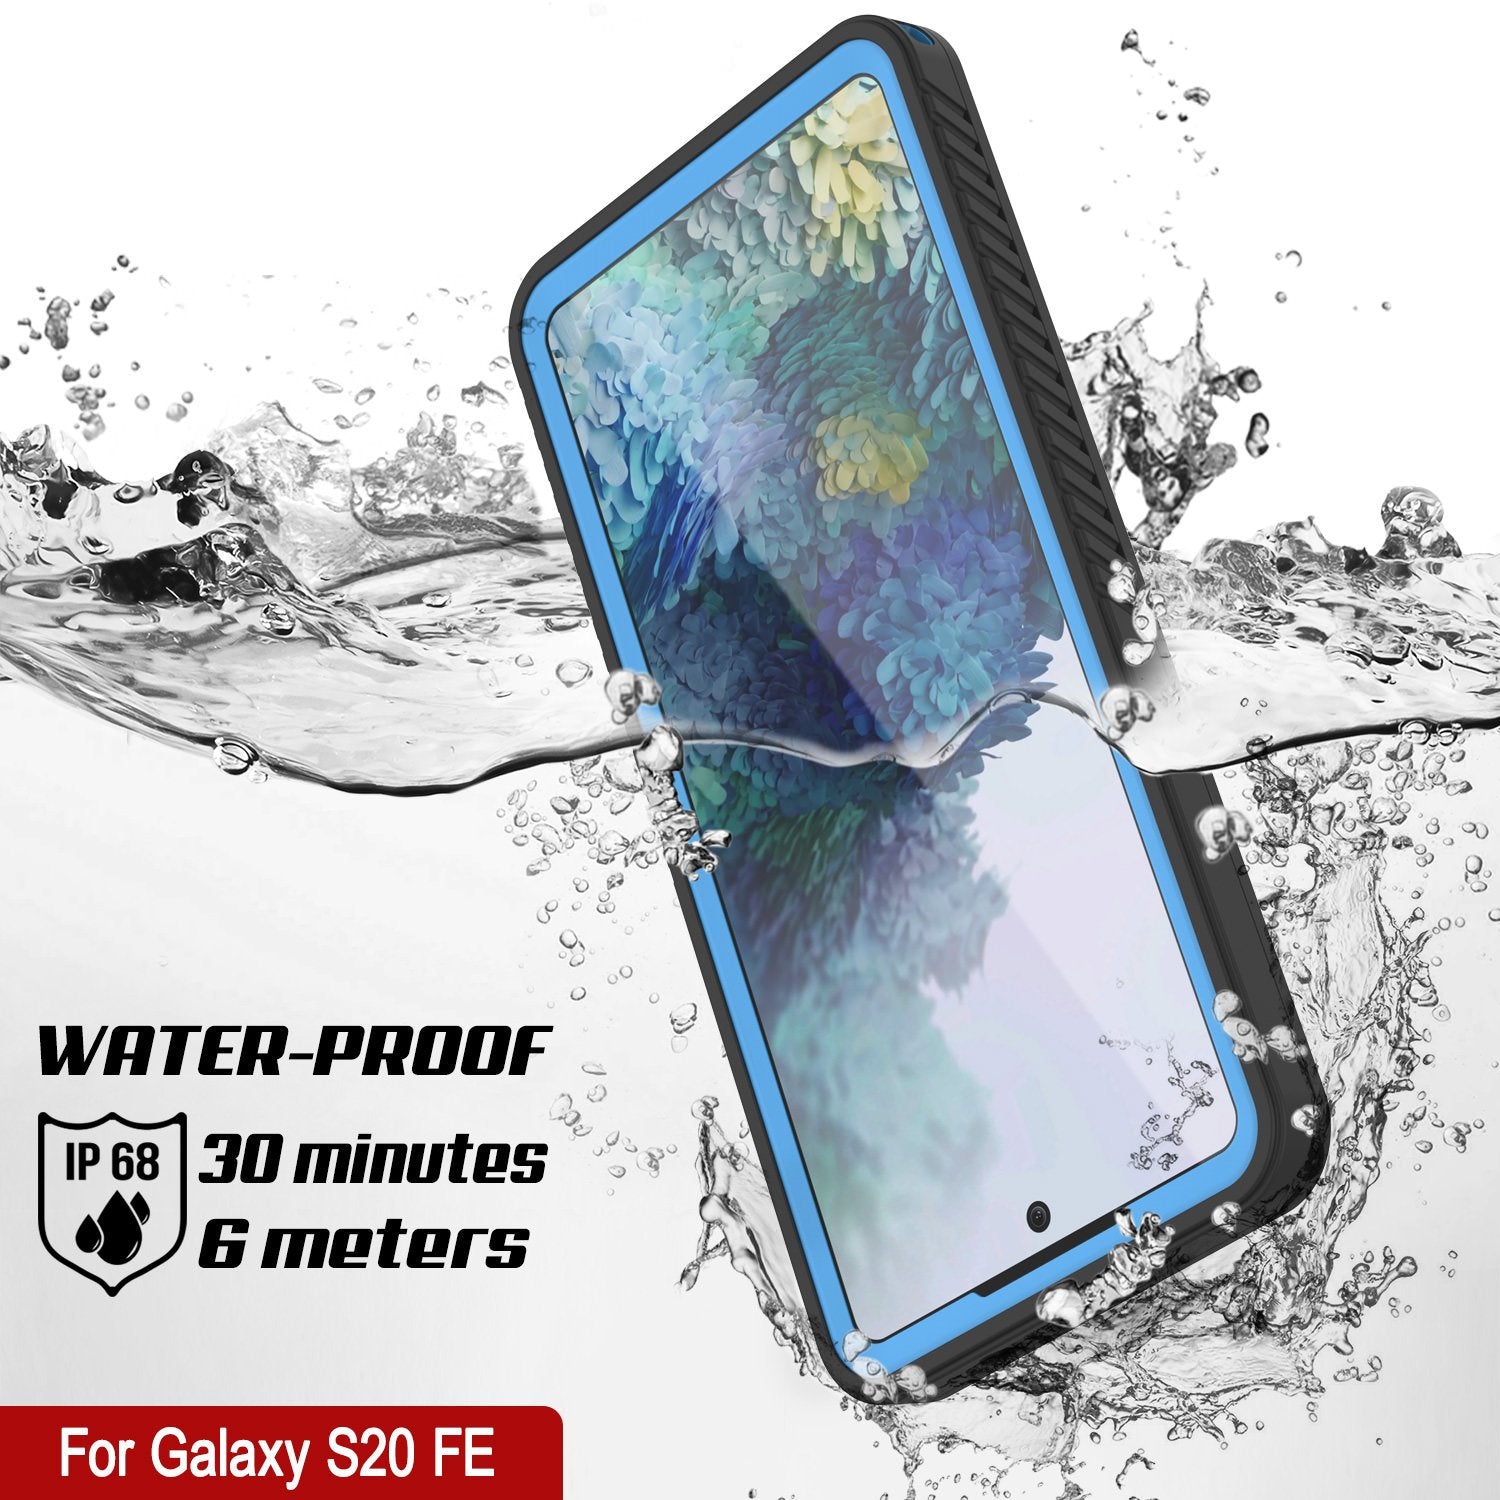 Galaxy S20 FE Water/Shock/Snow/dirt proof [Extreme Series] Slim Case [Light Blue]